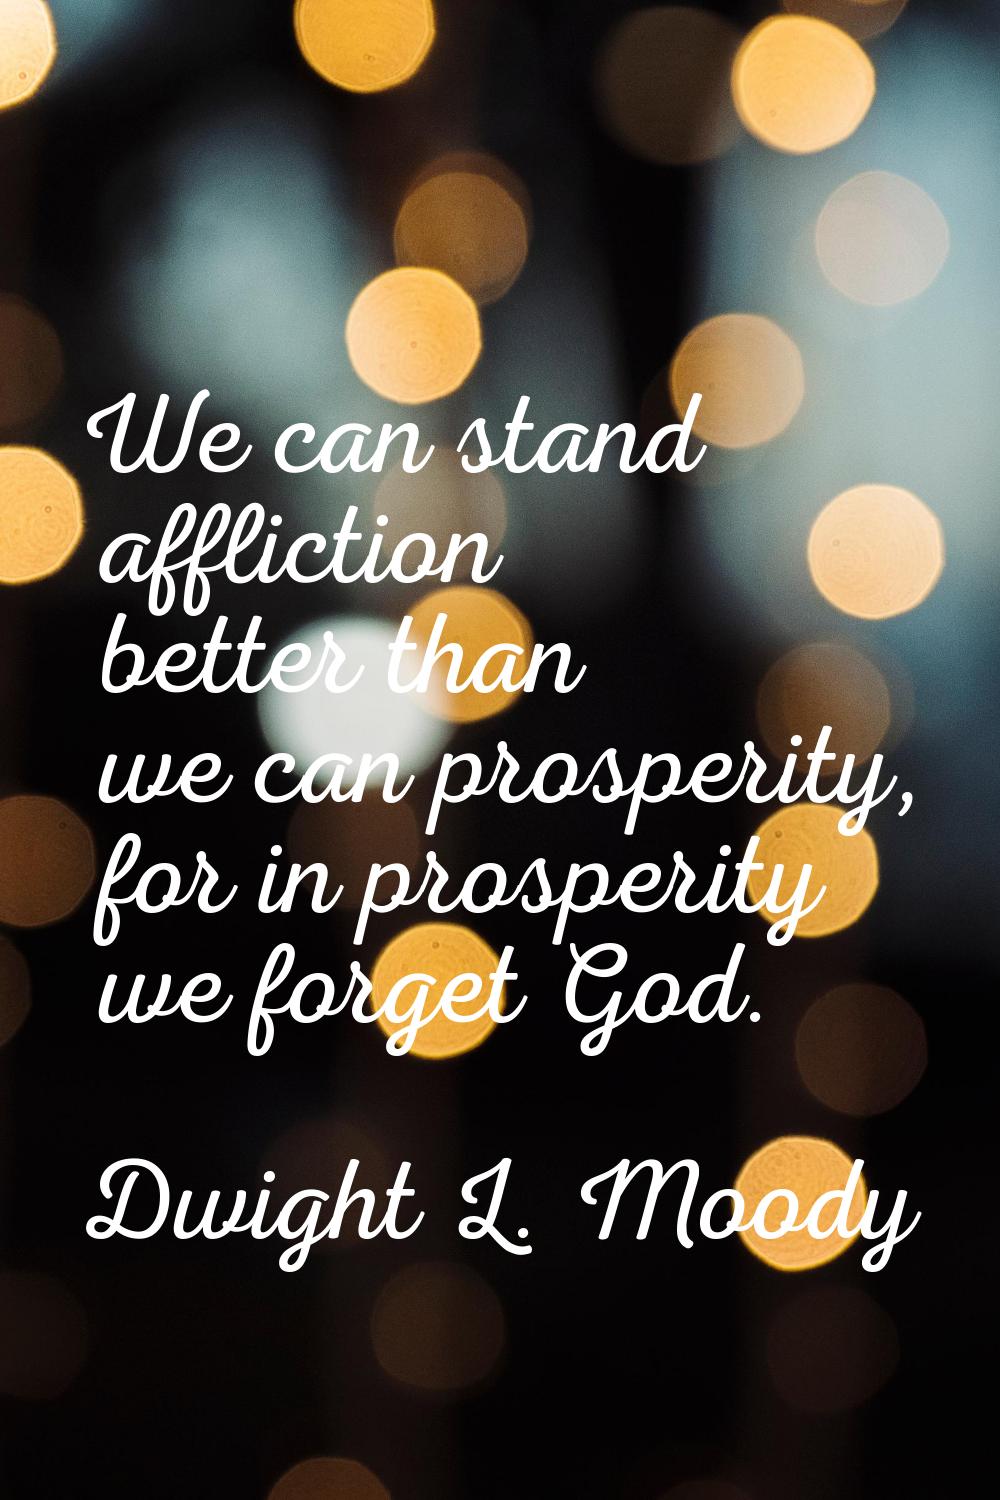 We can stand affliction better than we can prosperity, for in prosperity we forget God.